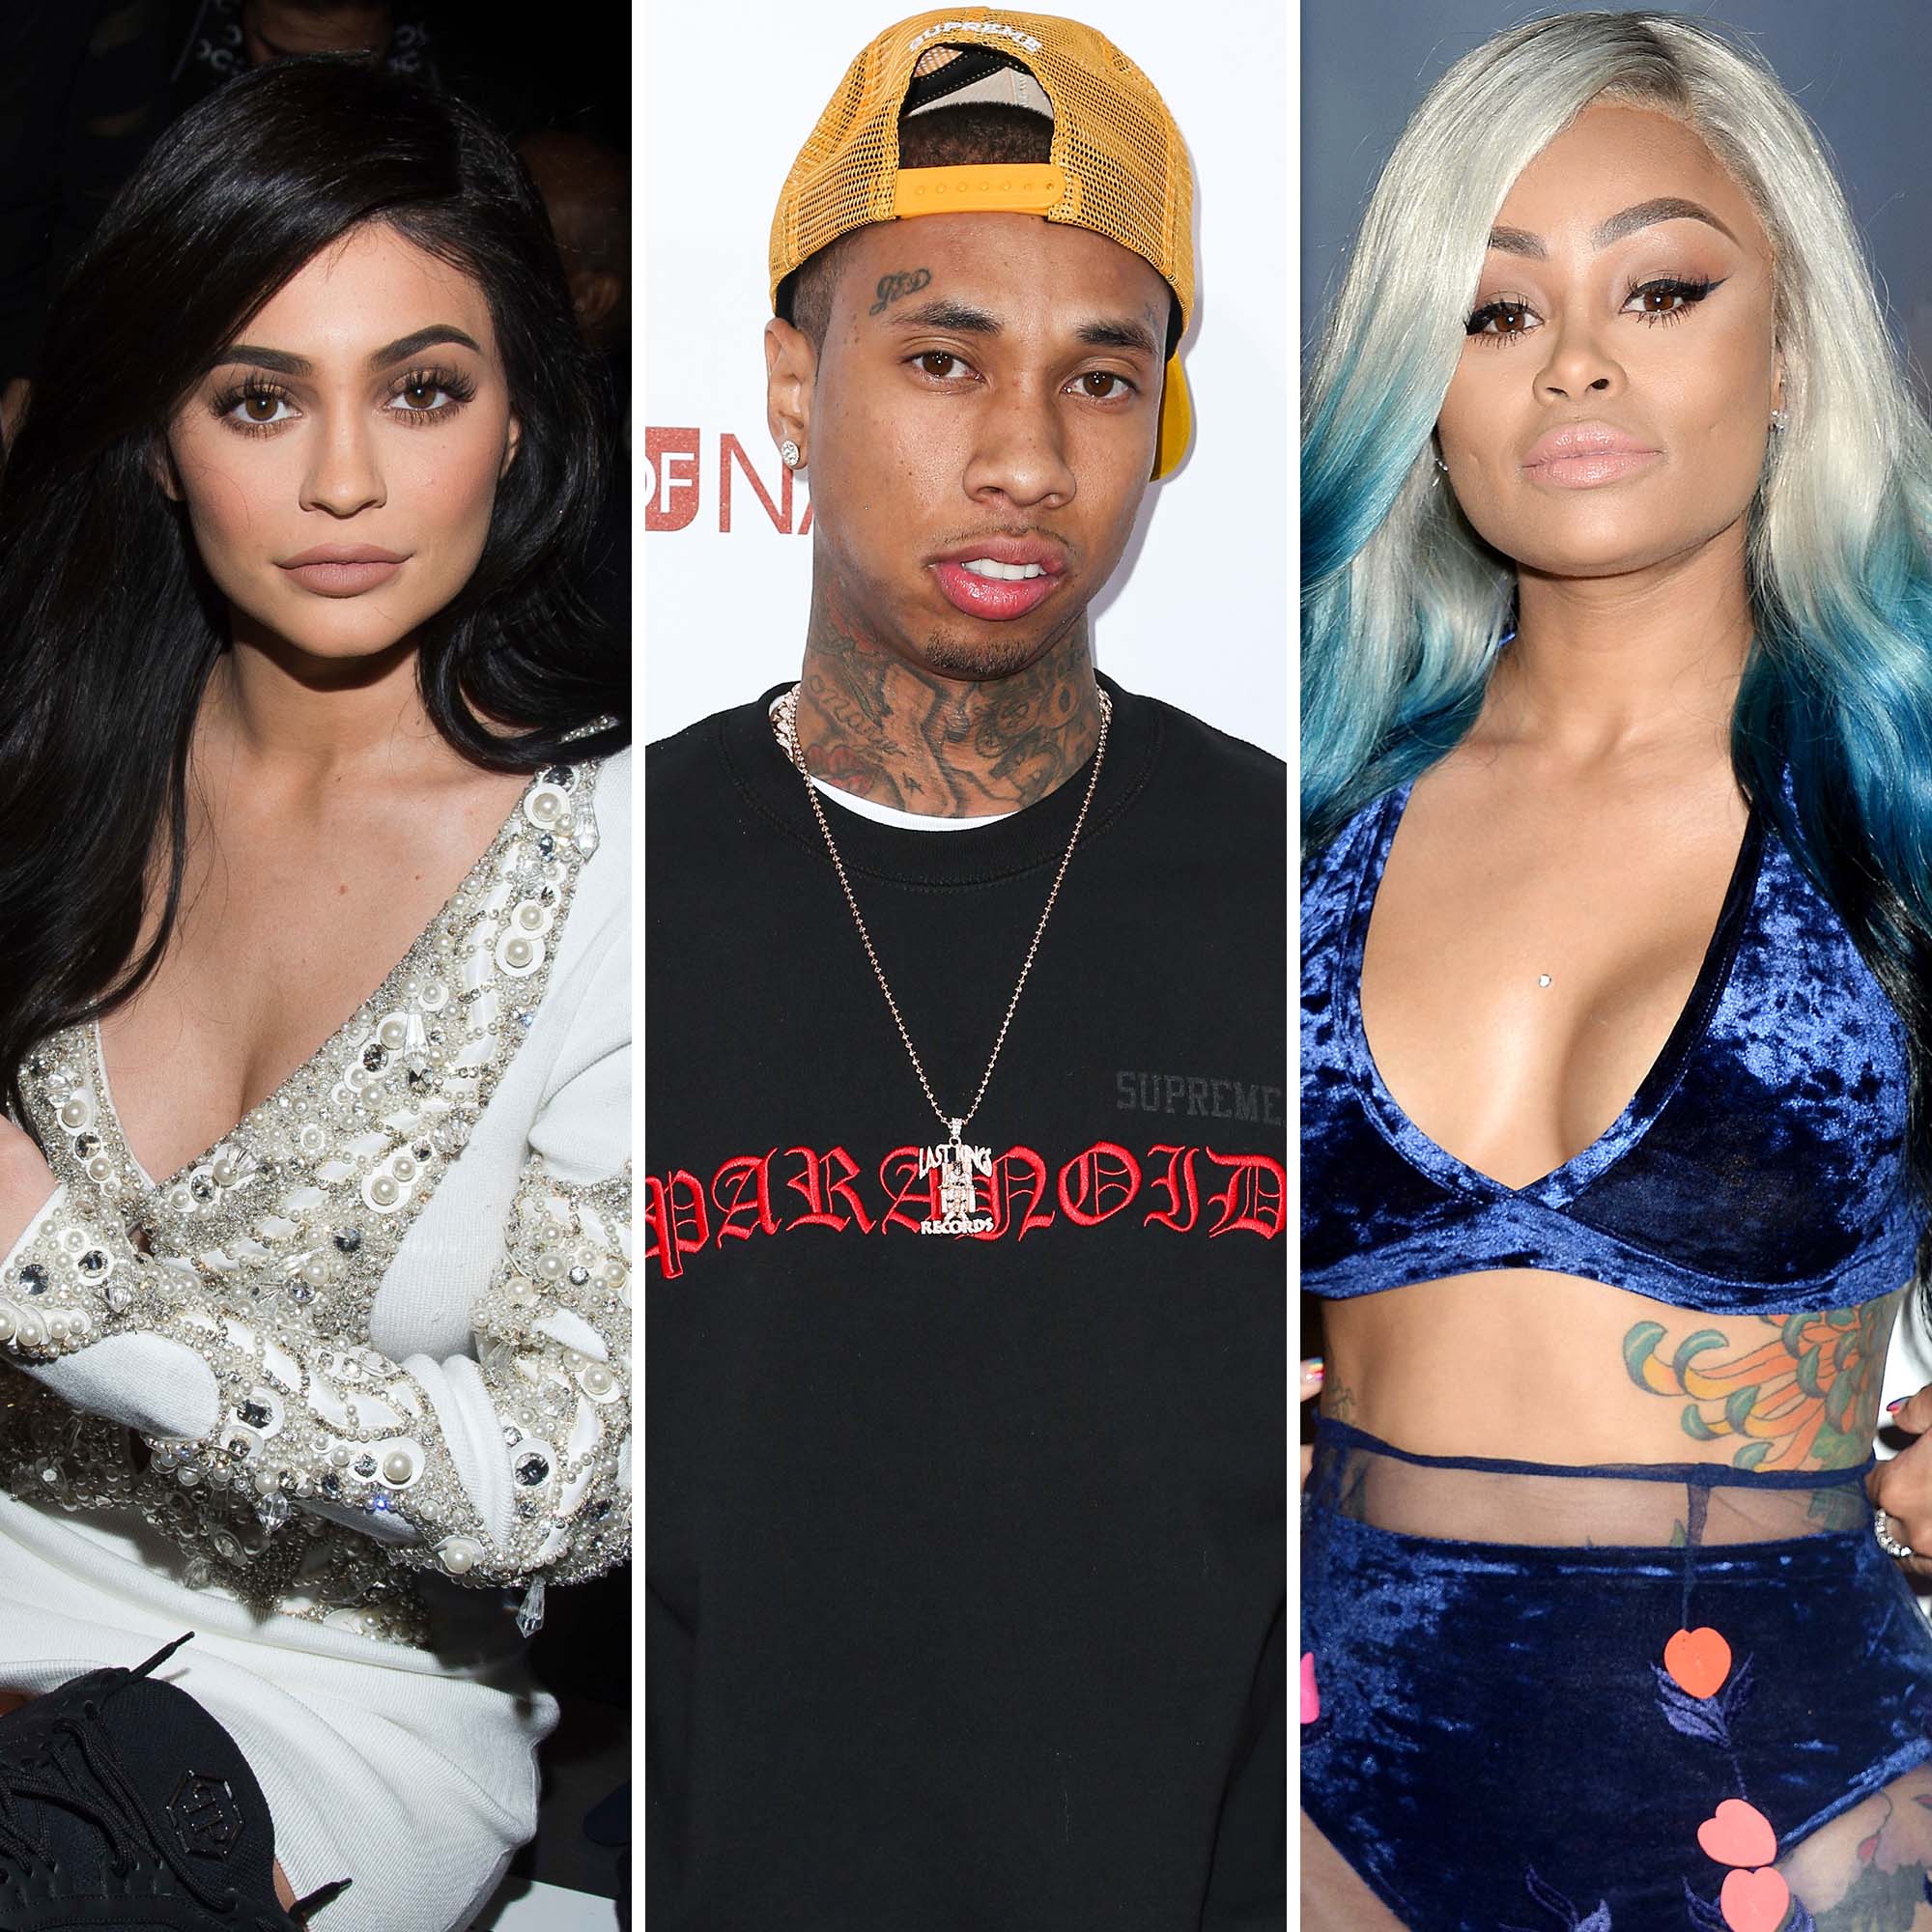 Kylie Jenner: Tyga Accused Blac Chyna of Attacking Him With Knife